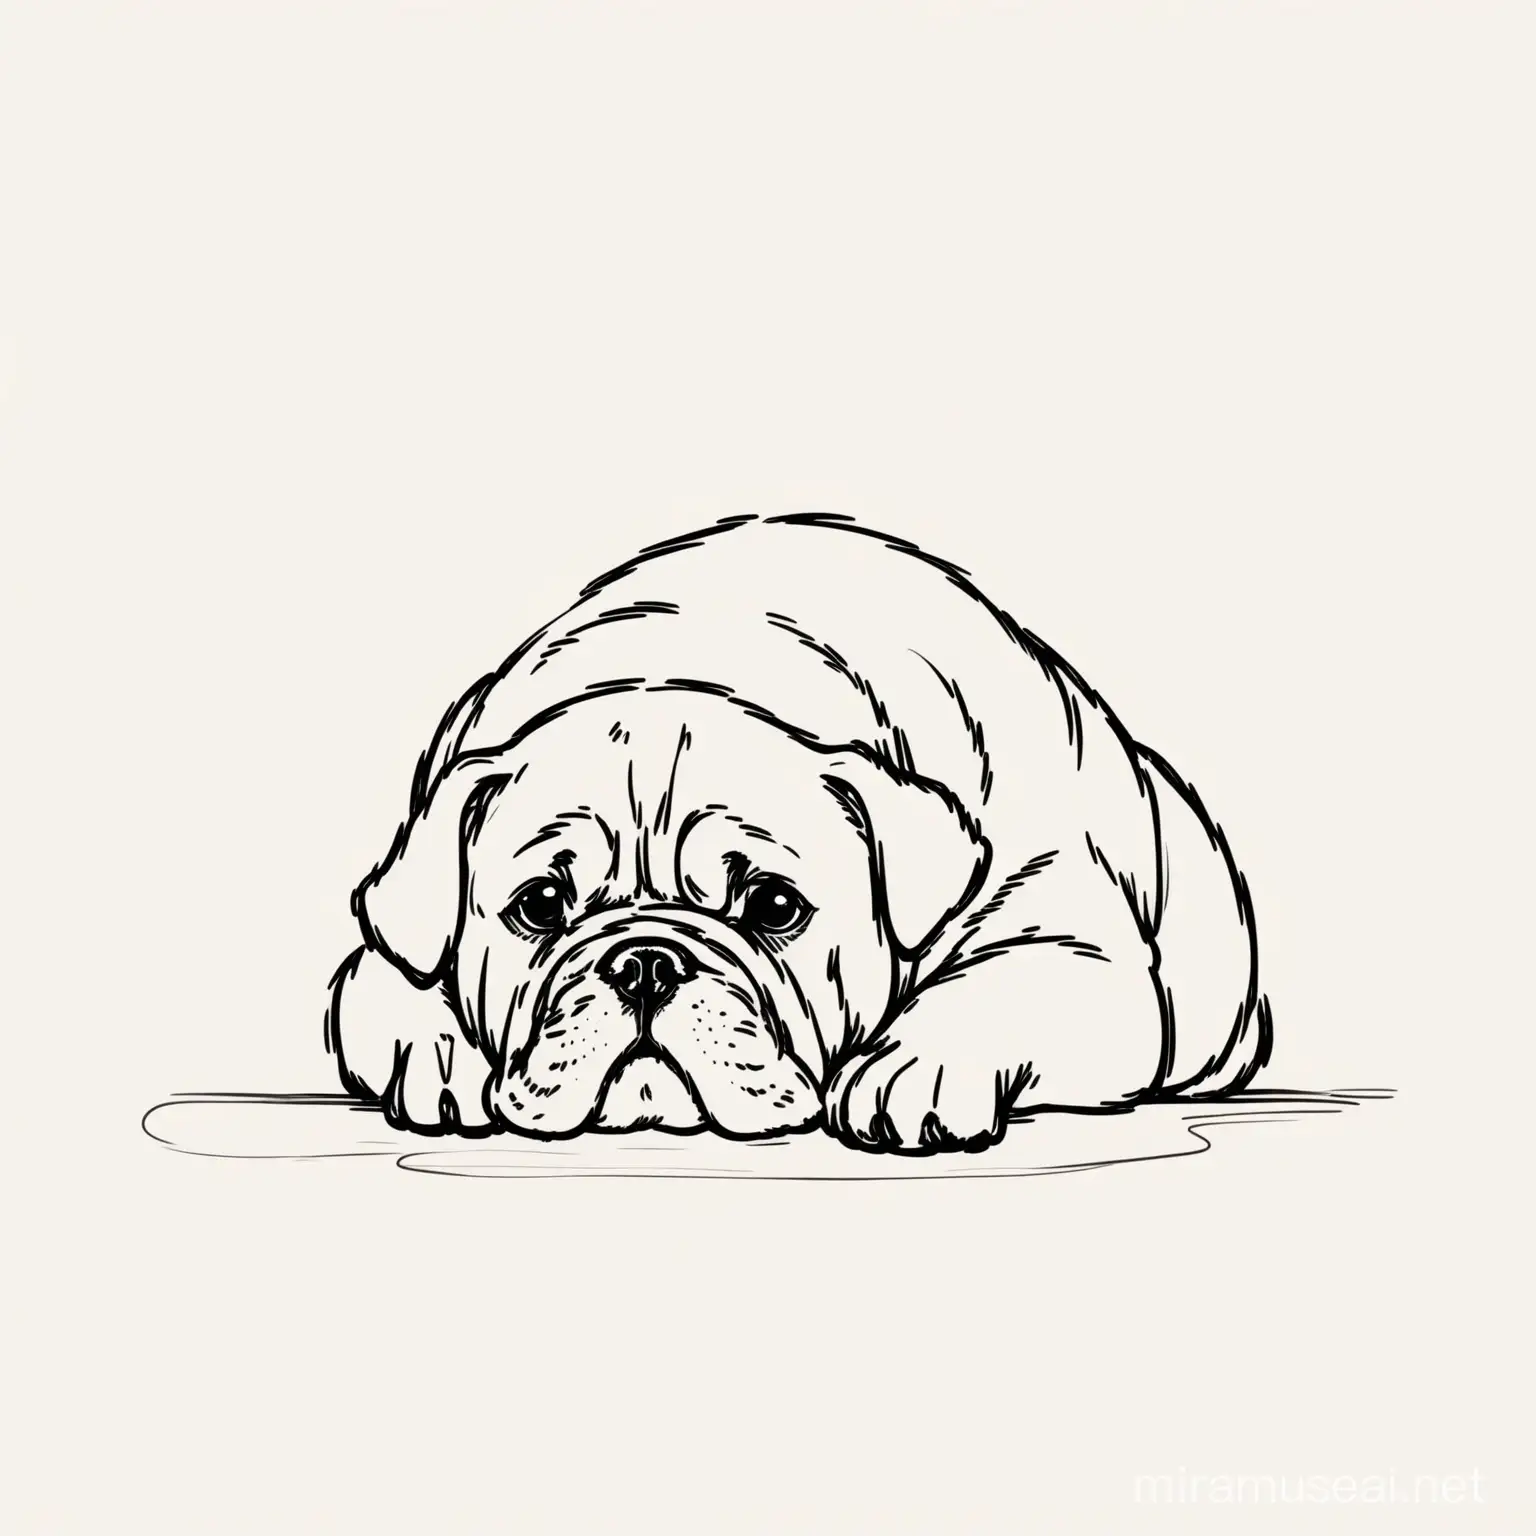 Single uninterrupted line drawing of a cute bulldog in thought, minimalism, abstracted image, single ink line drawing